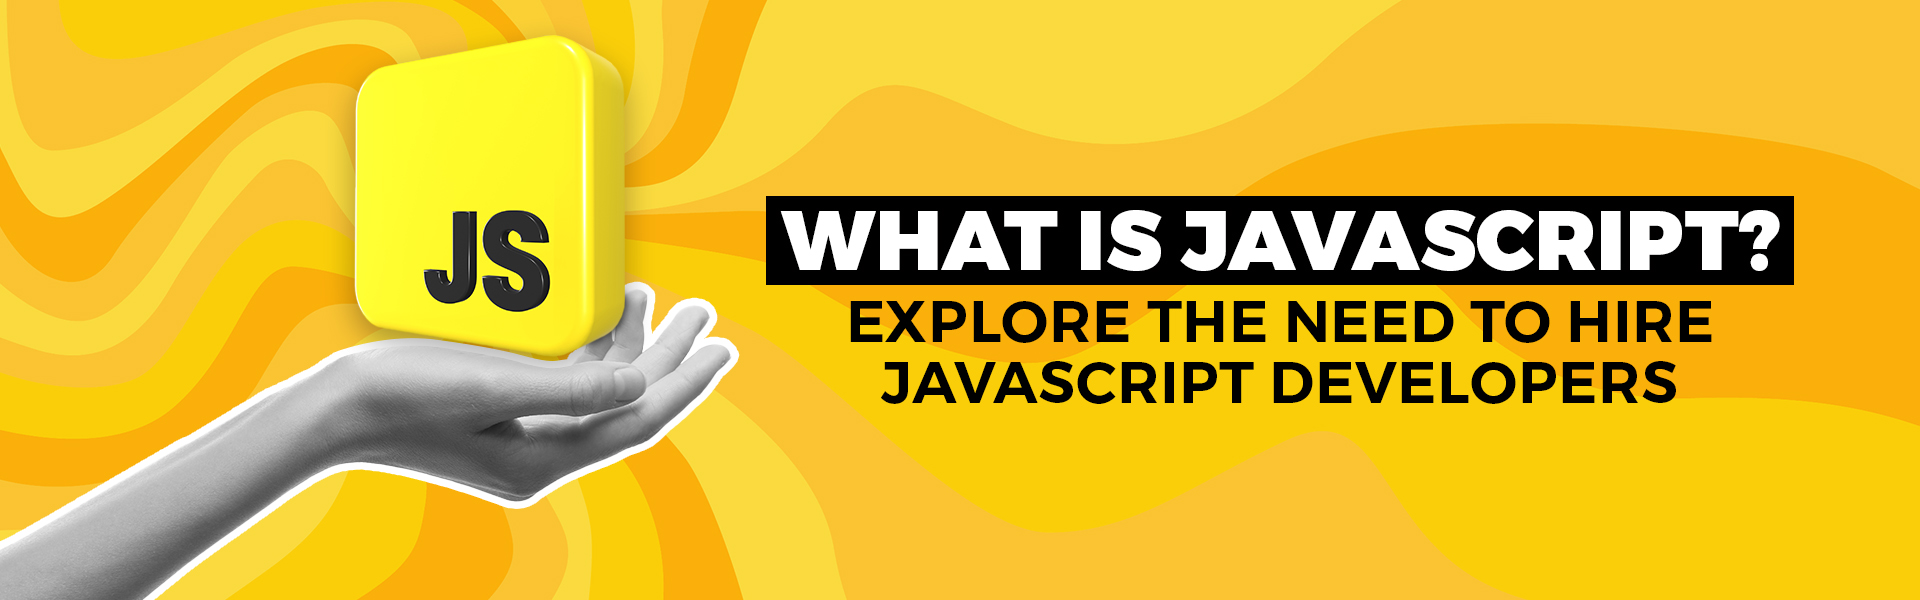 CC_What is JavaScript Explore the Need to Hire JavaScript Developers_main banner